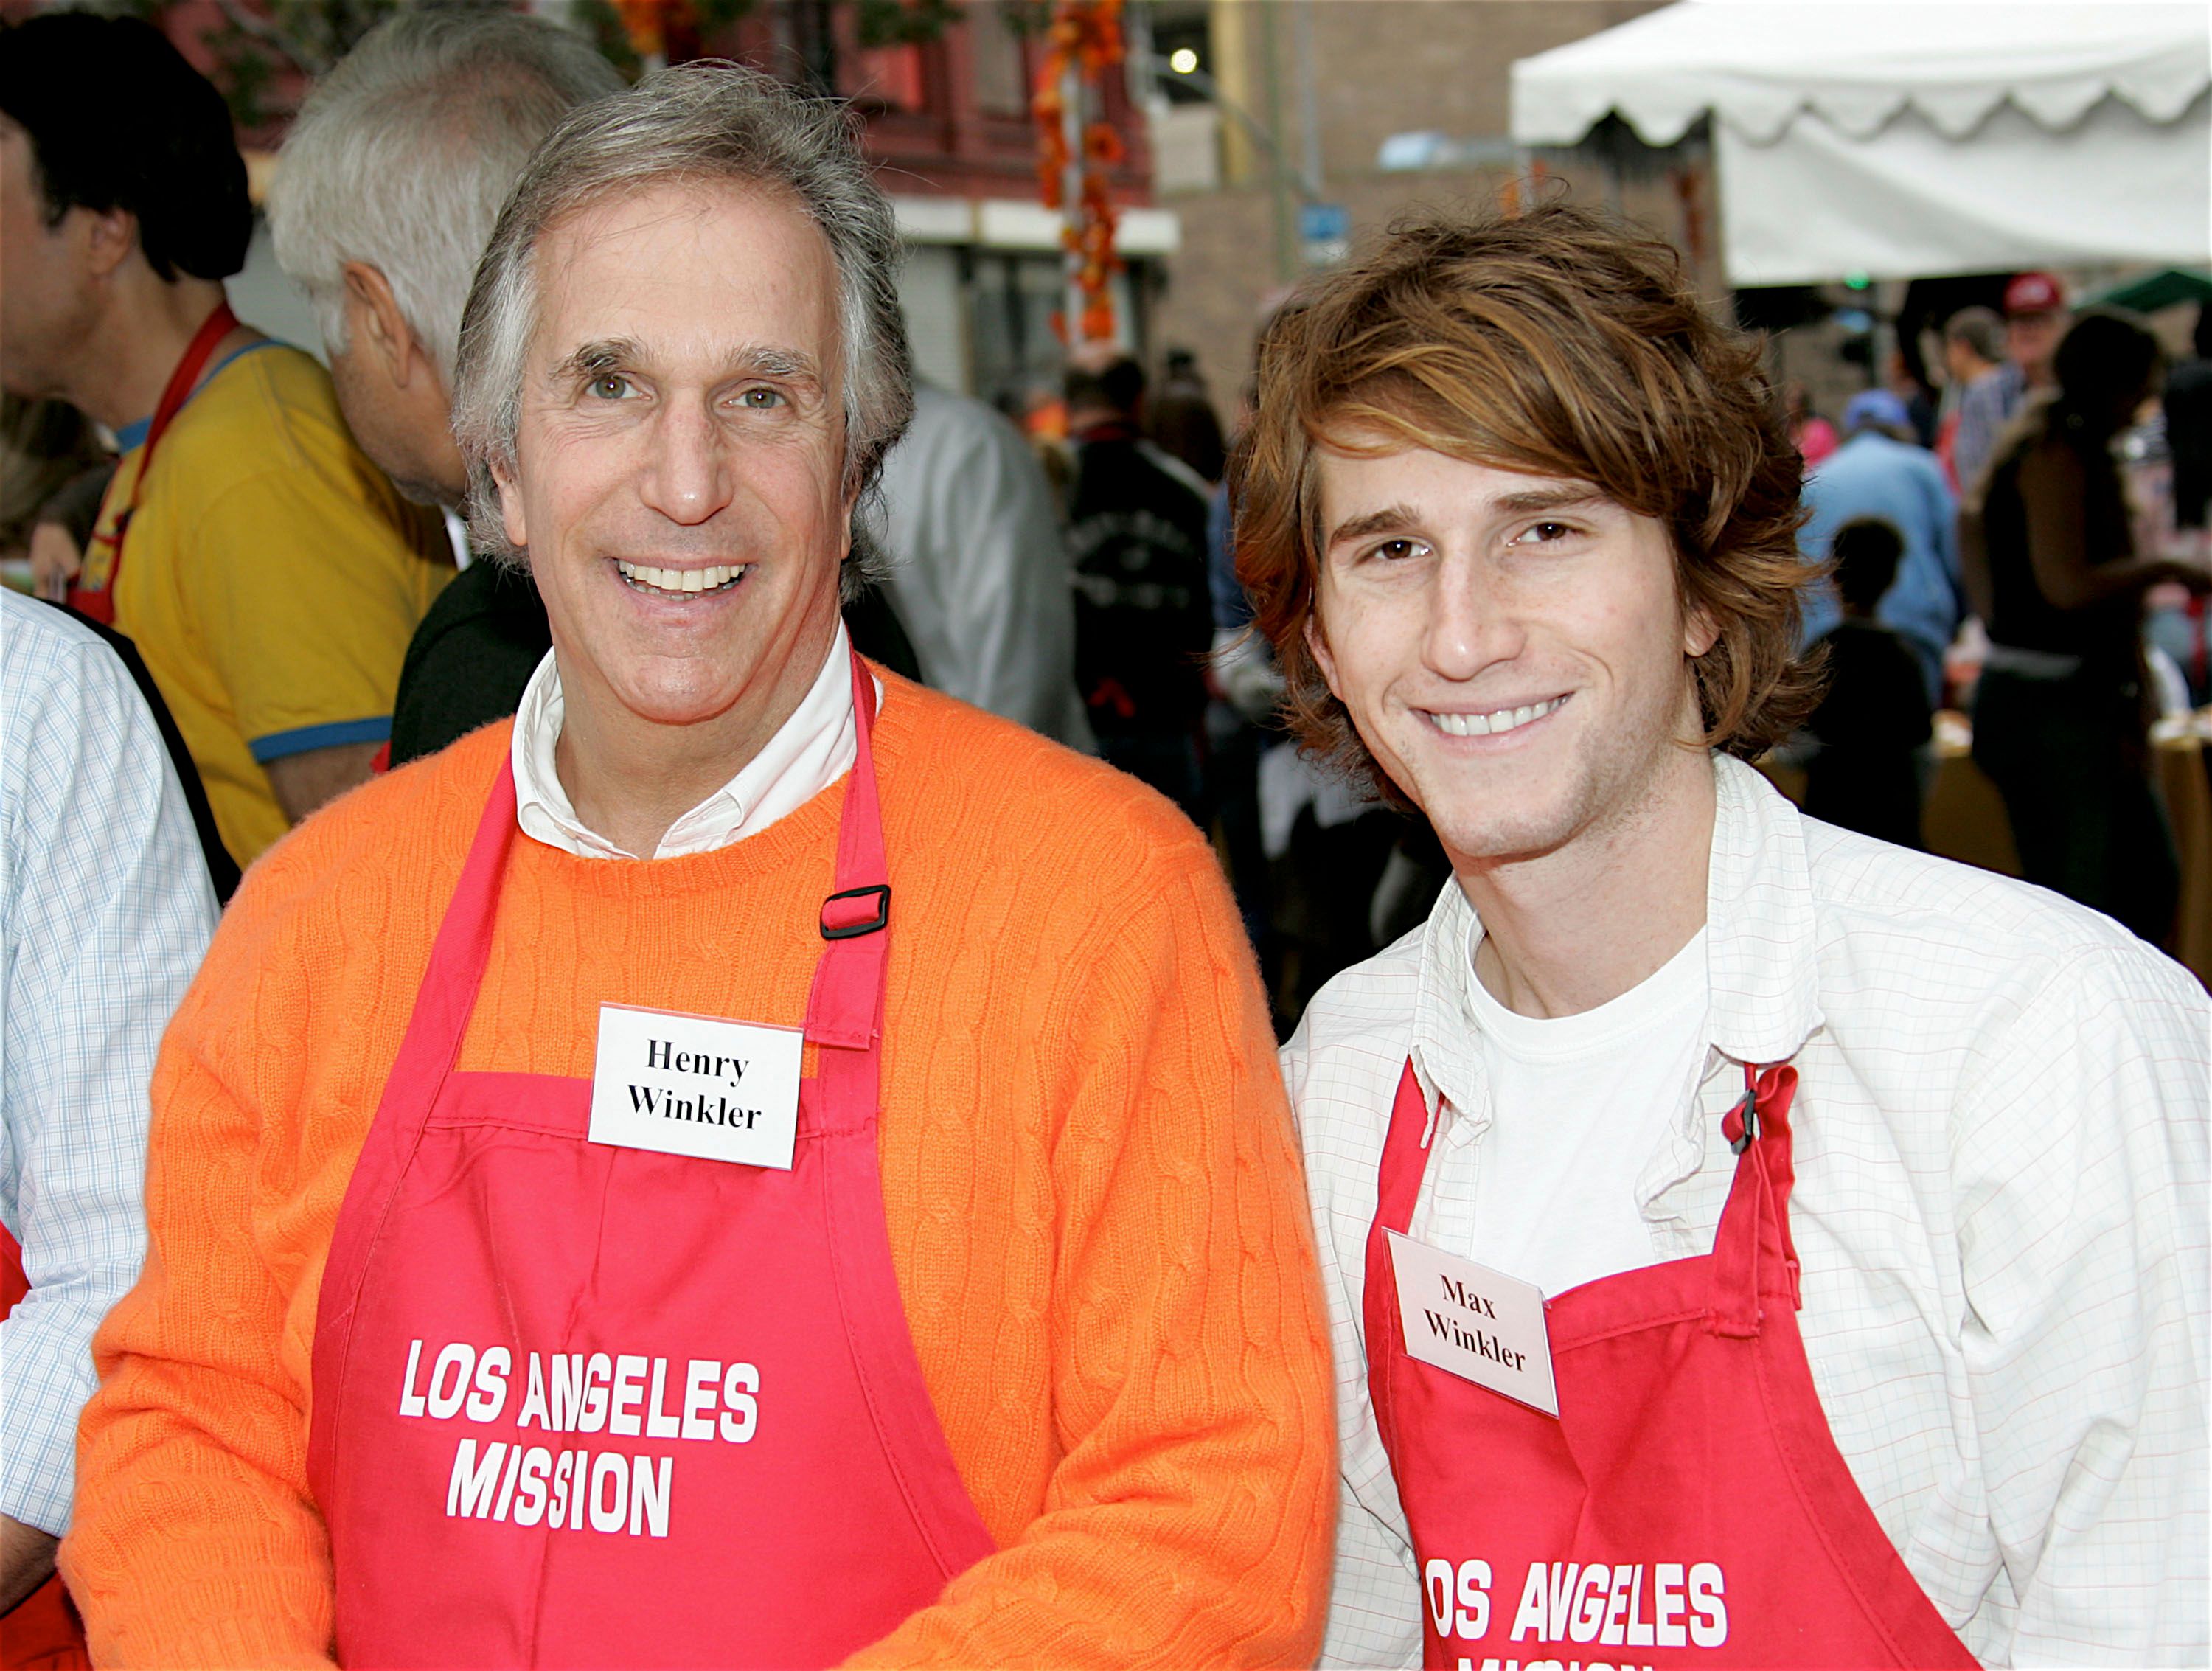 Henry Winkler and his son Max in 2005 | Source: Getty Images